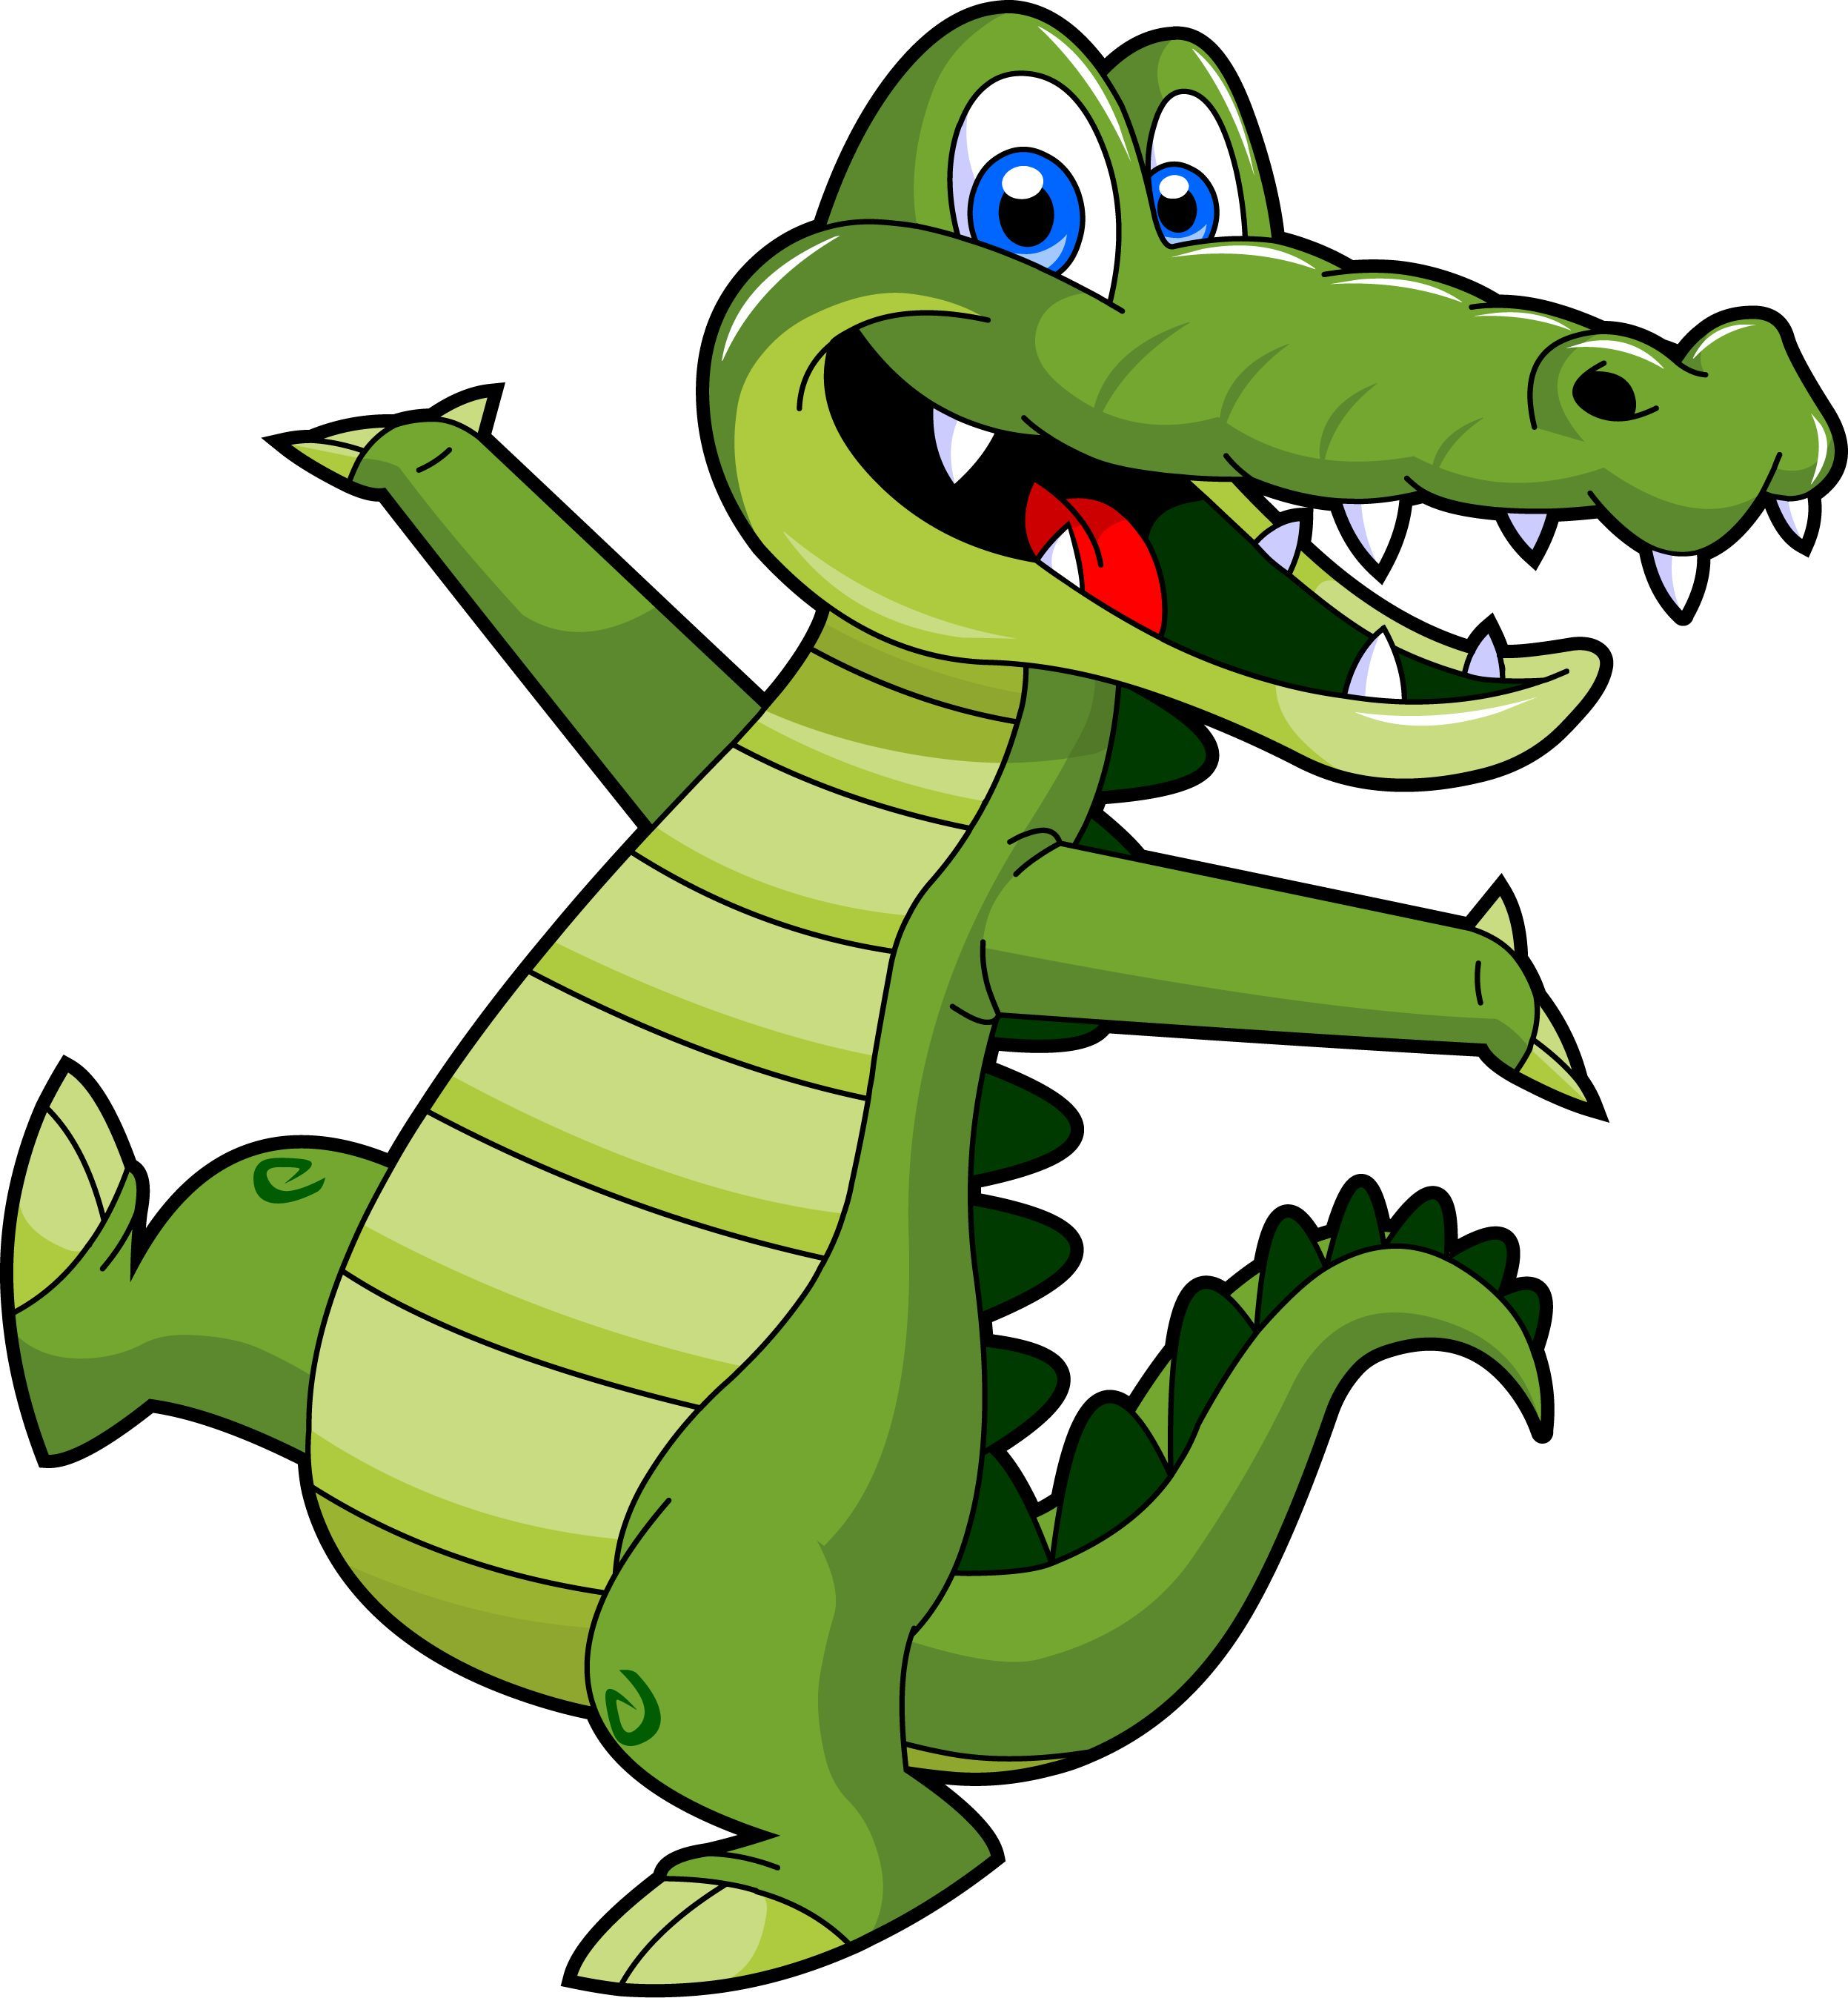 Baby alligator free images. 2 clipart cute